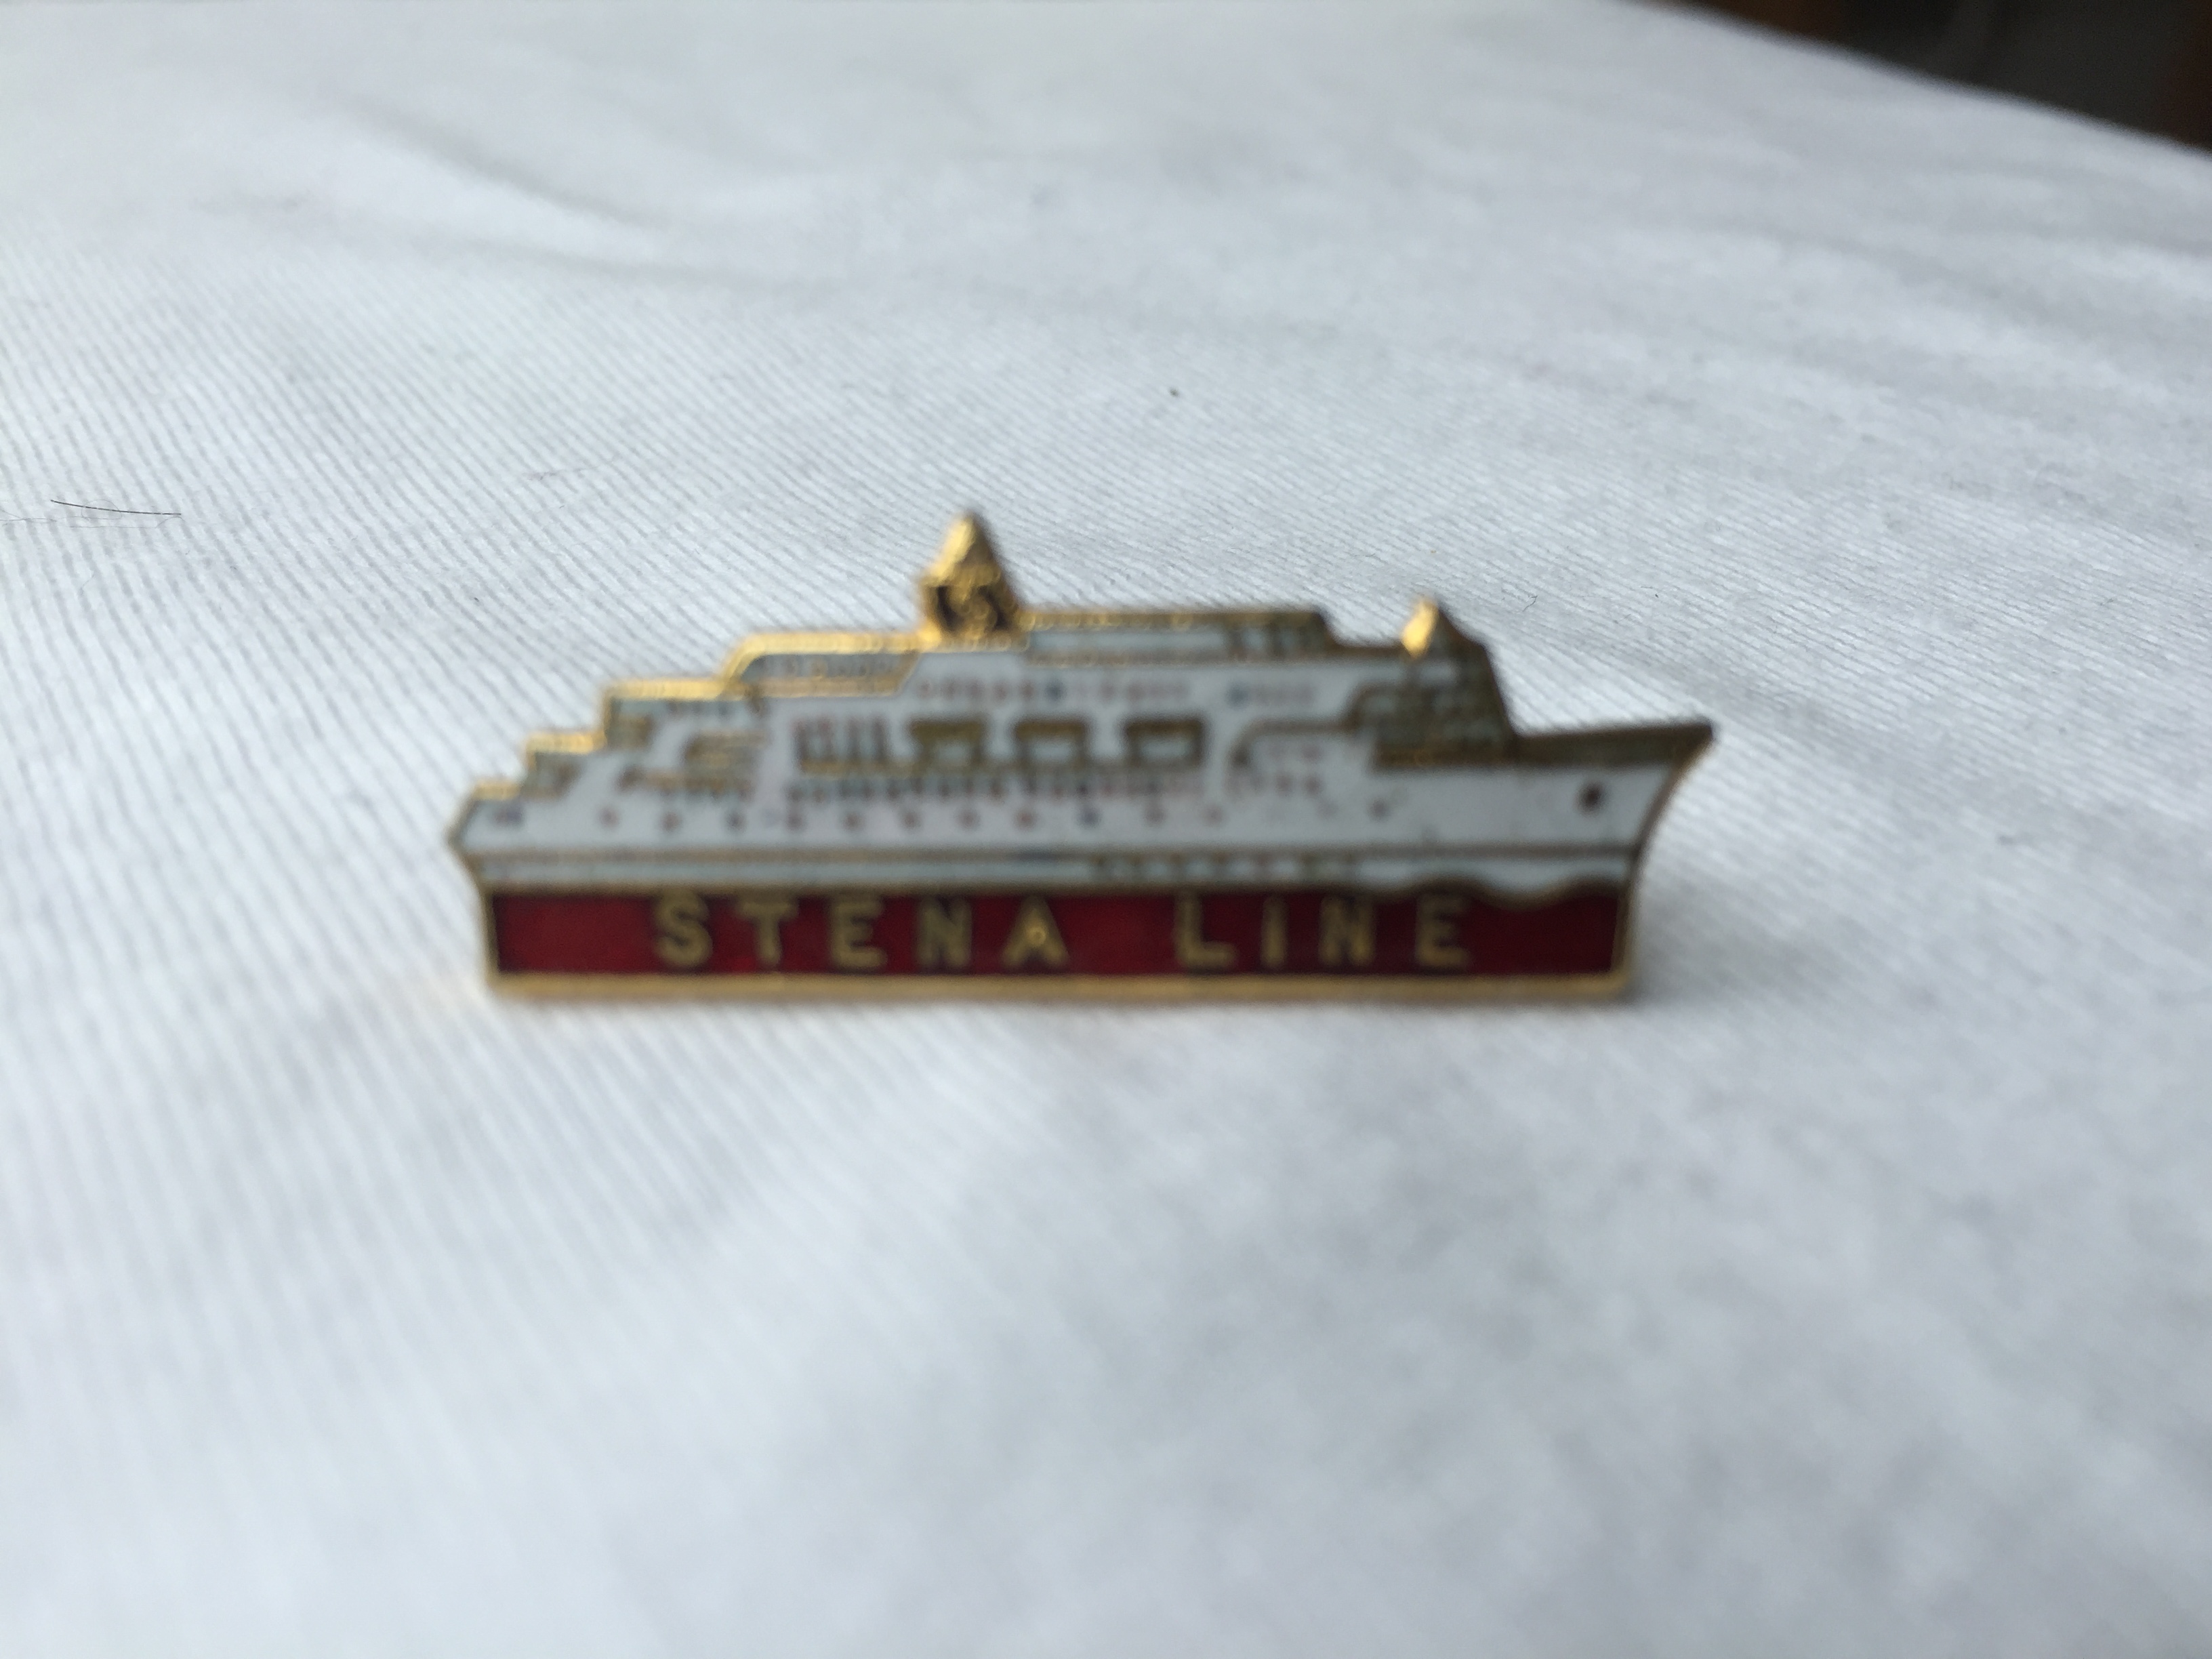 SHIP SHAPE LAPEL PIN FROM THE STENA LINE FERRY CROSSING COMPANY